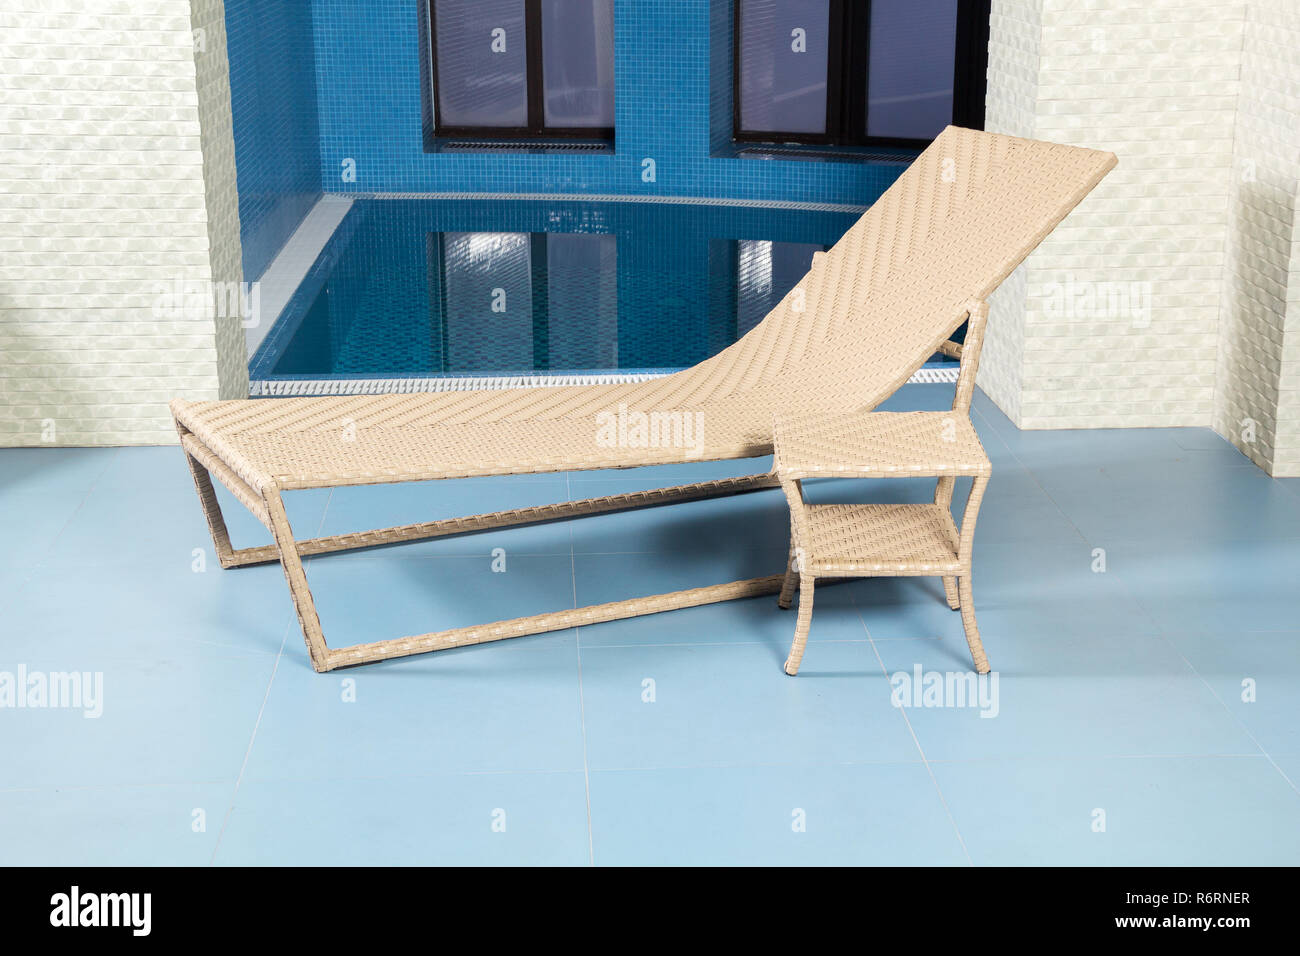 Chaise longue in piscina Foto Stock